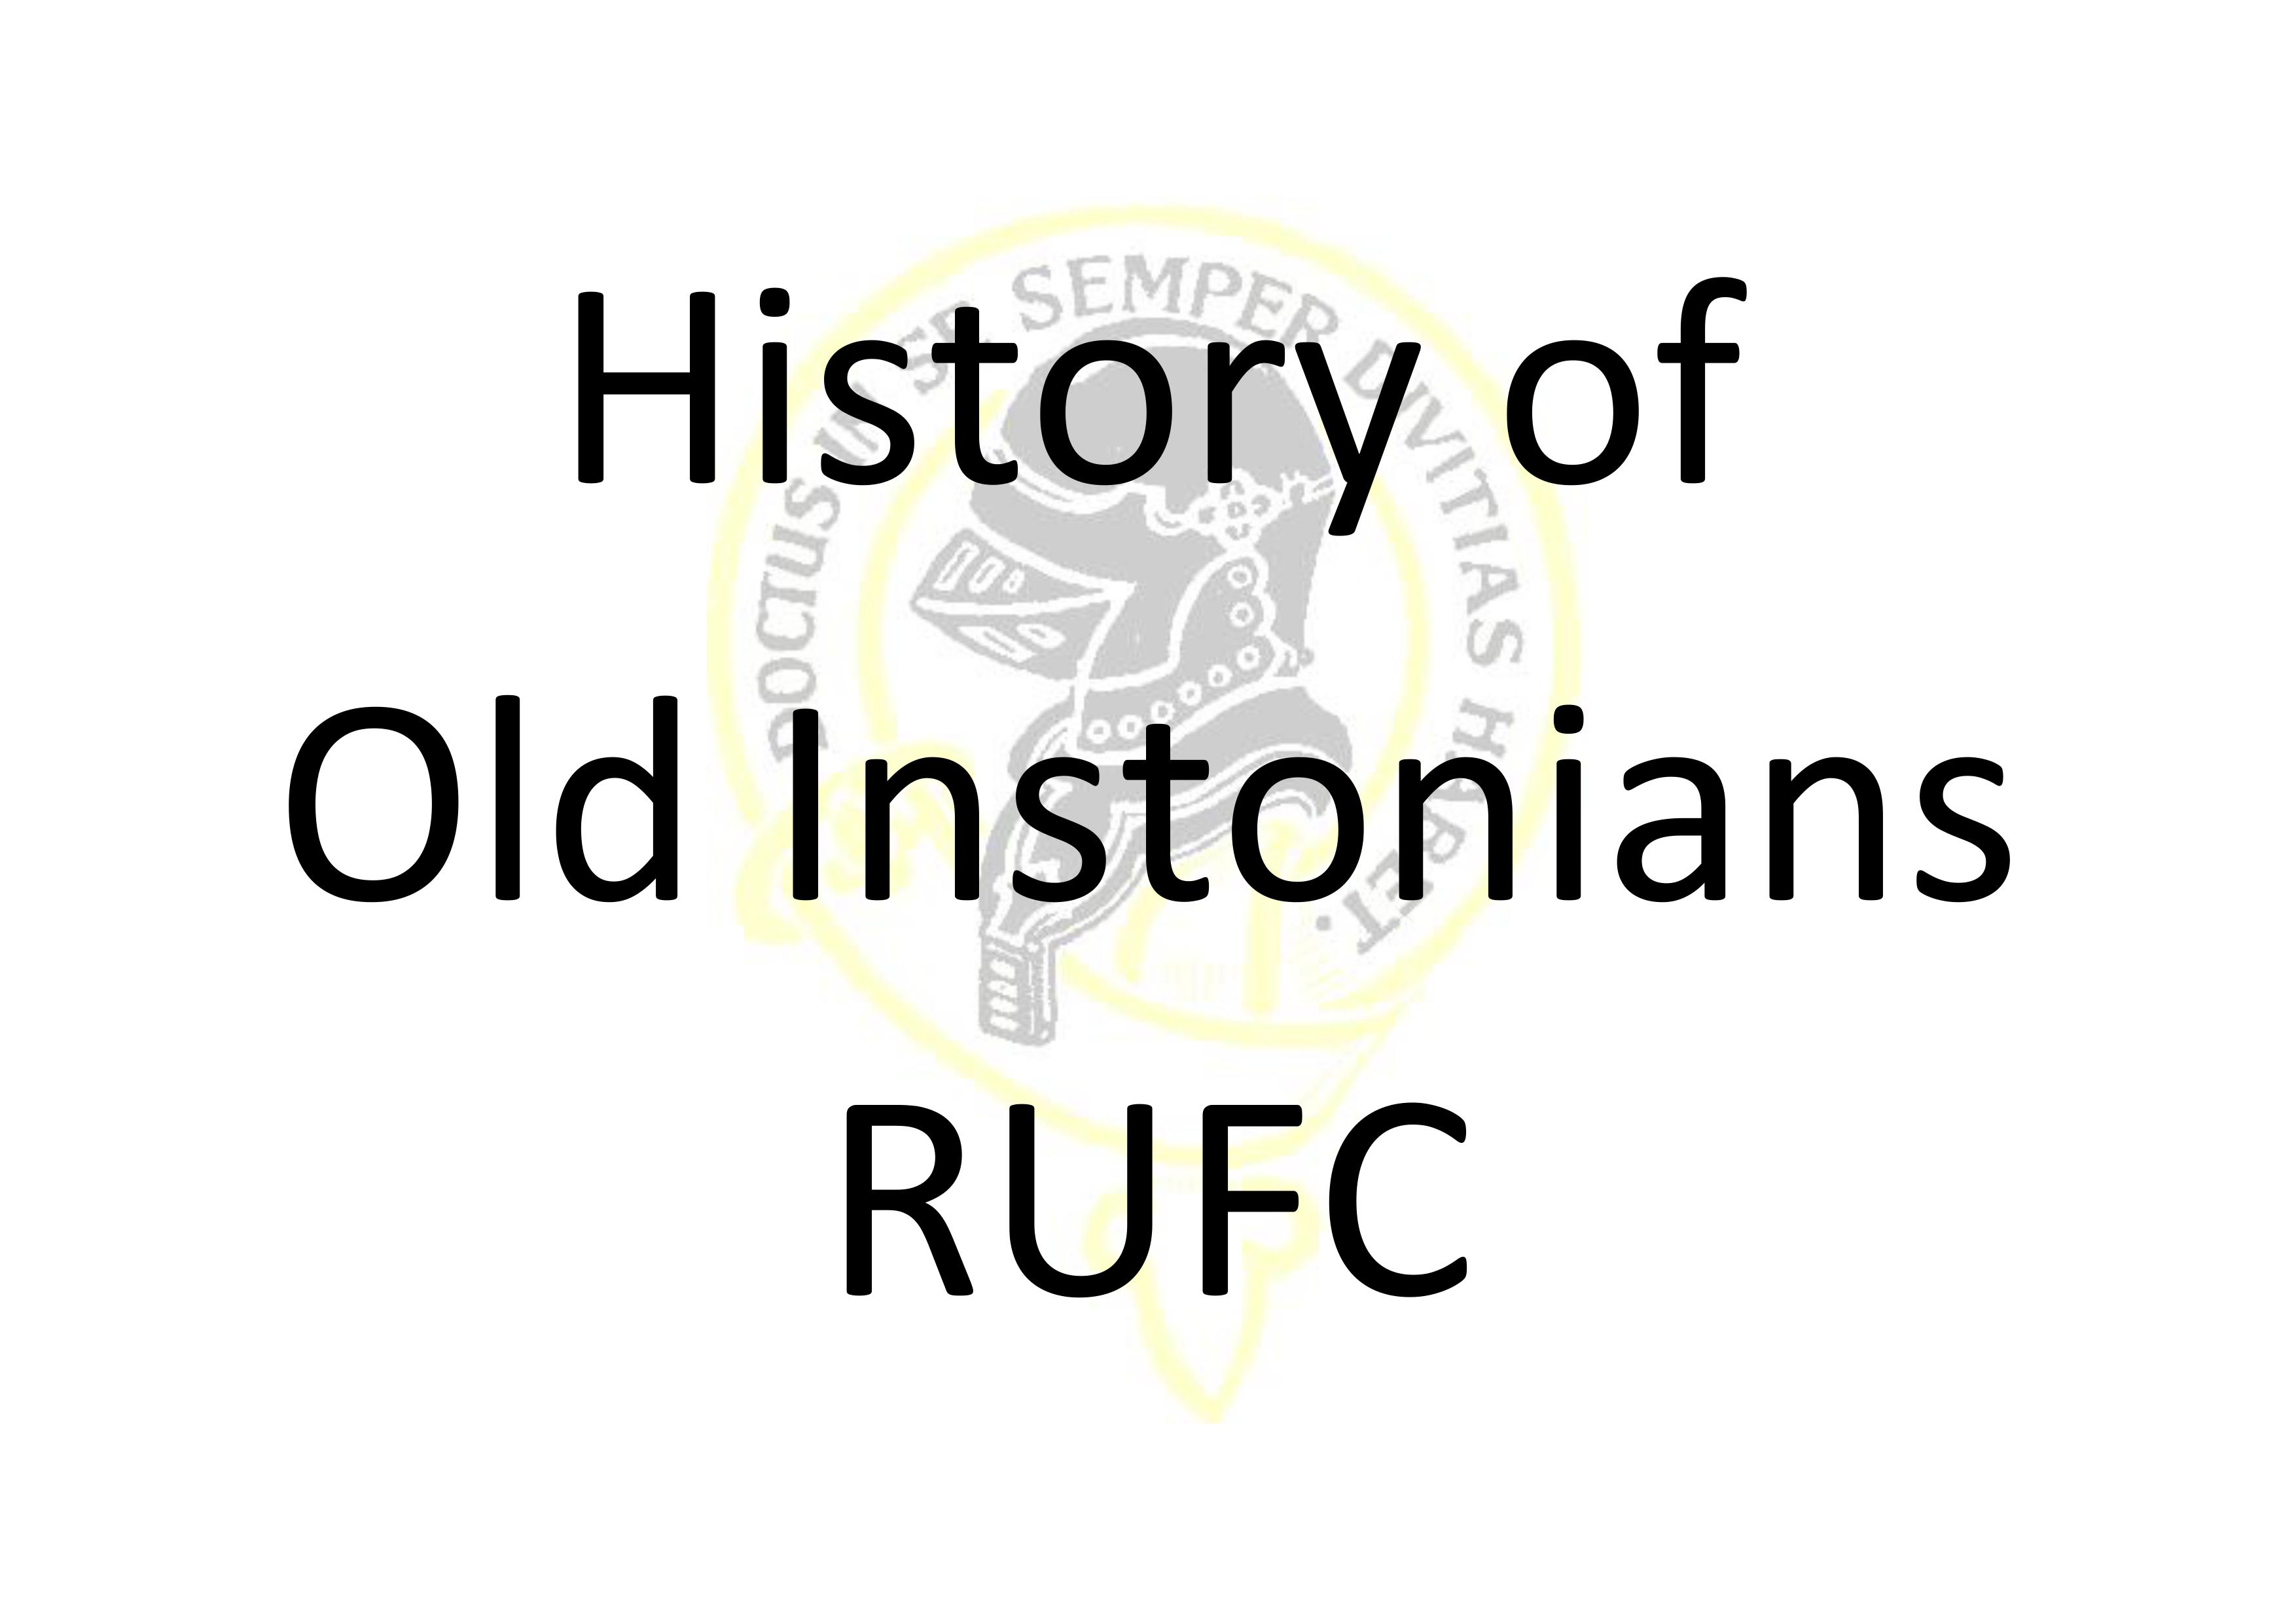 History of Old Instonians RUFC